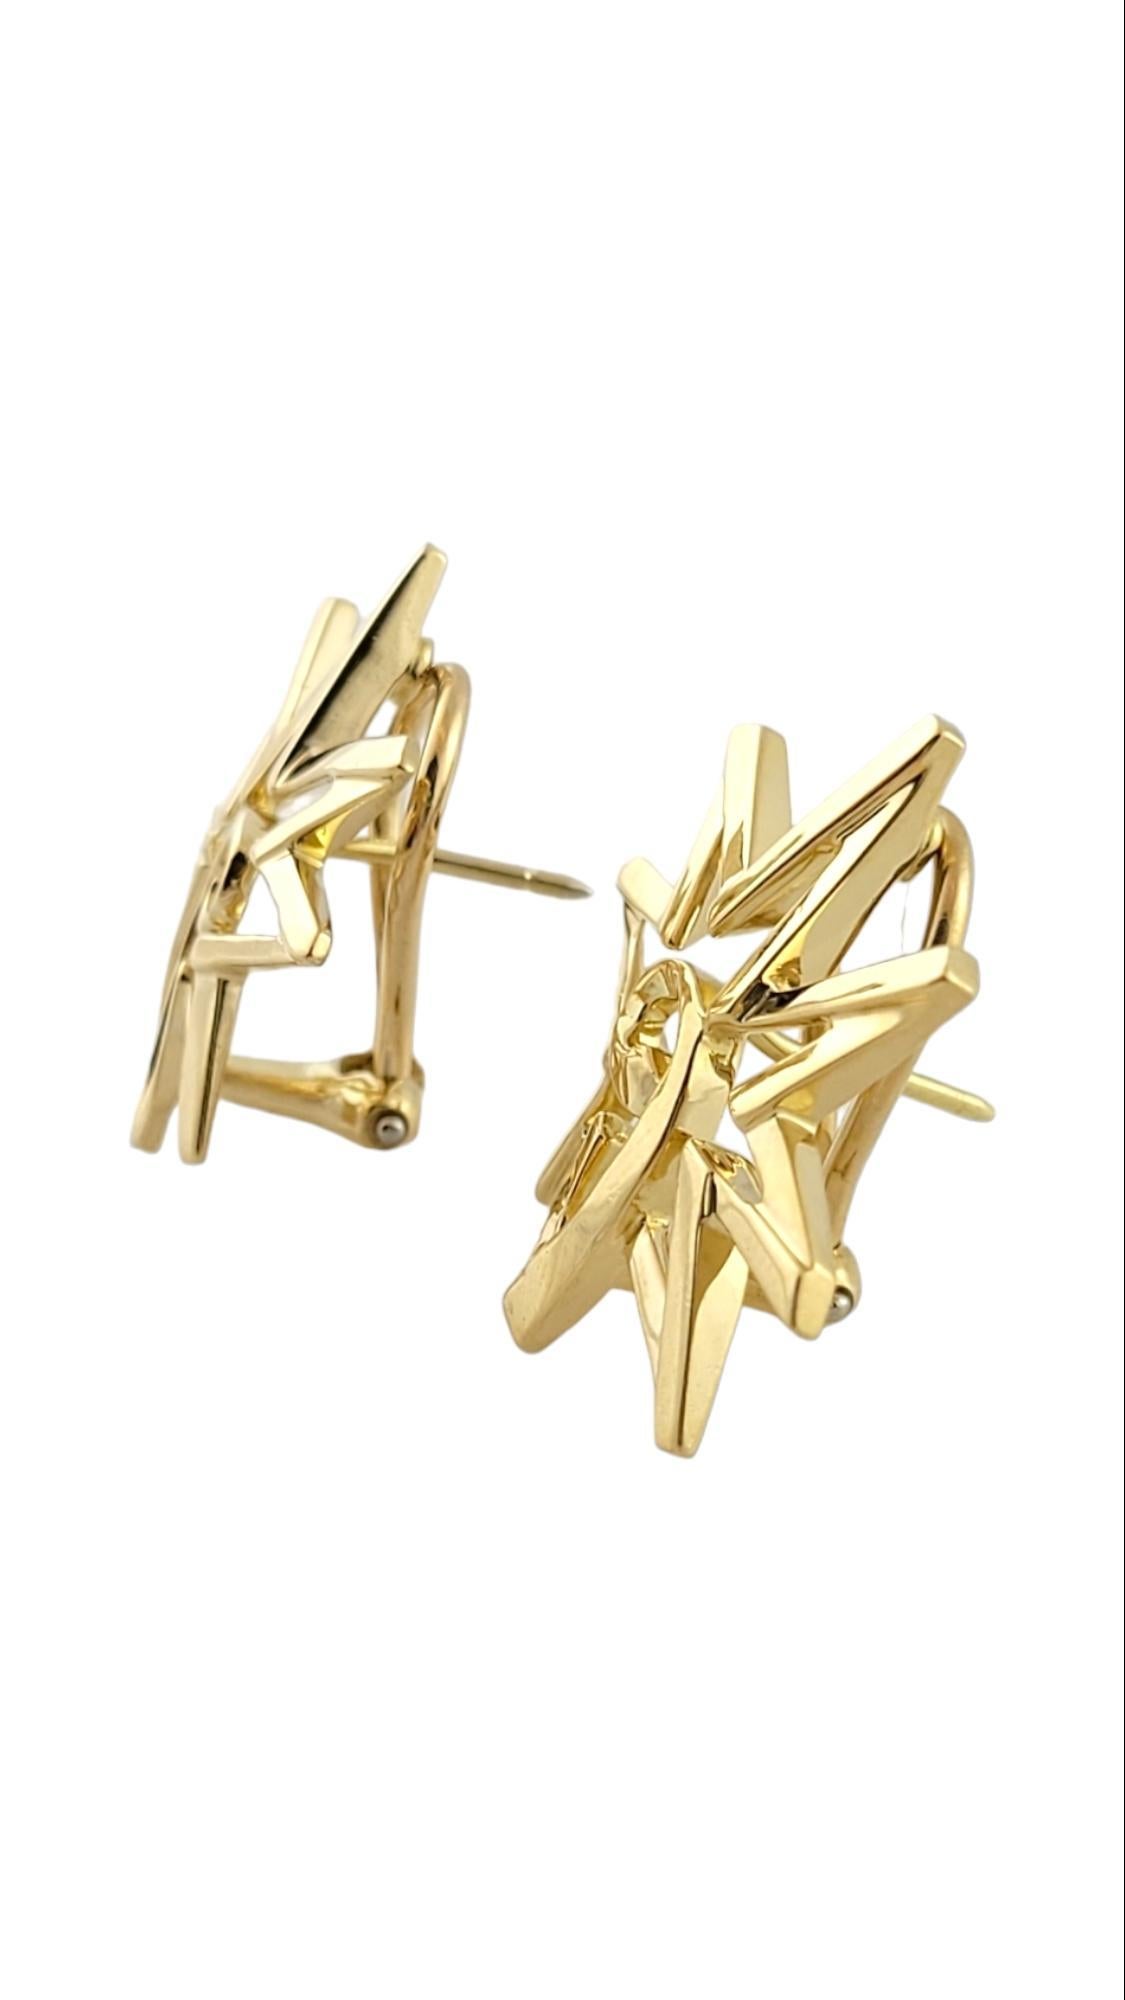 Vintage Tiffany & Co Paloma Picasso 18K Yellow Gold Starburst Earrings

This gorgeous set of Tiffany & Co. Paloma Picasso earrings were beautifully crafted from 18K yellow gold!

Size: 23mm X 23mm

Weight: 10.39 g/ 6.68 dwt

Hallmark: Tiffany & Co